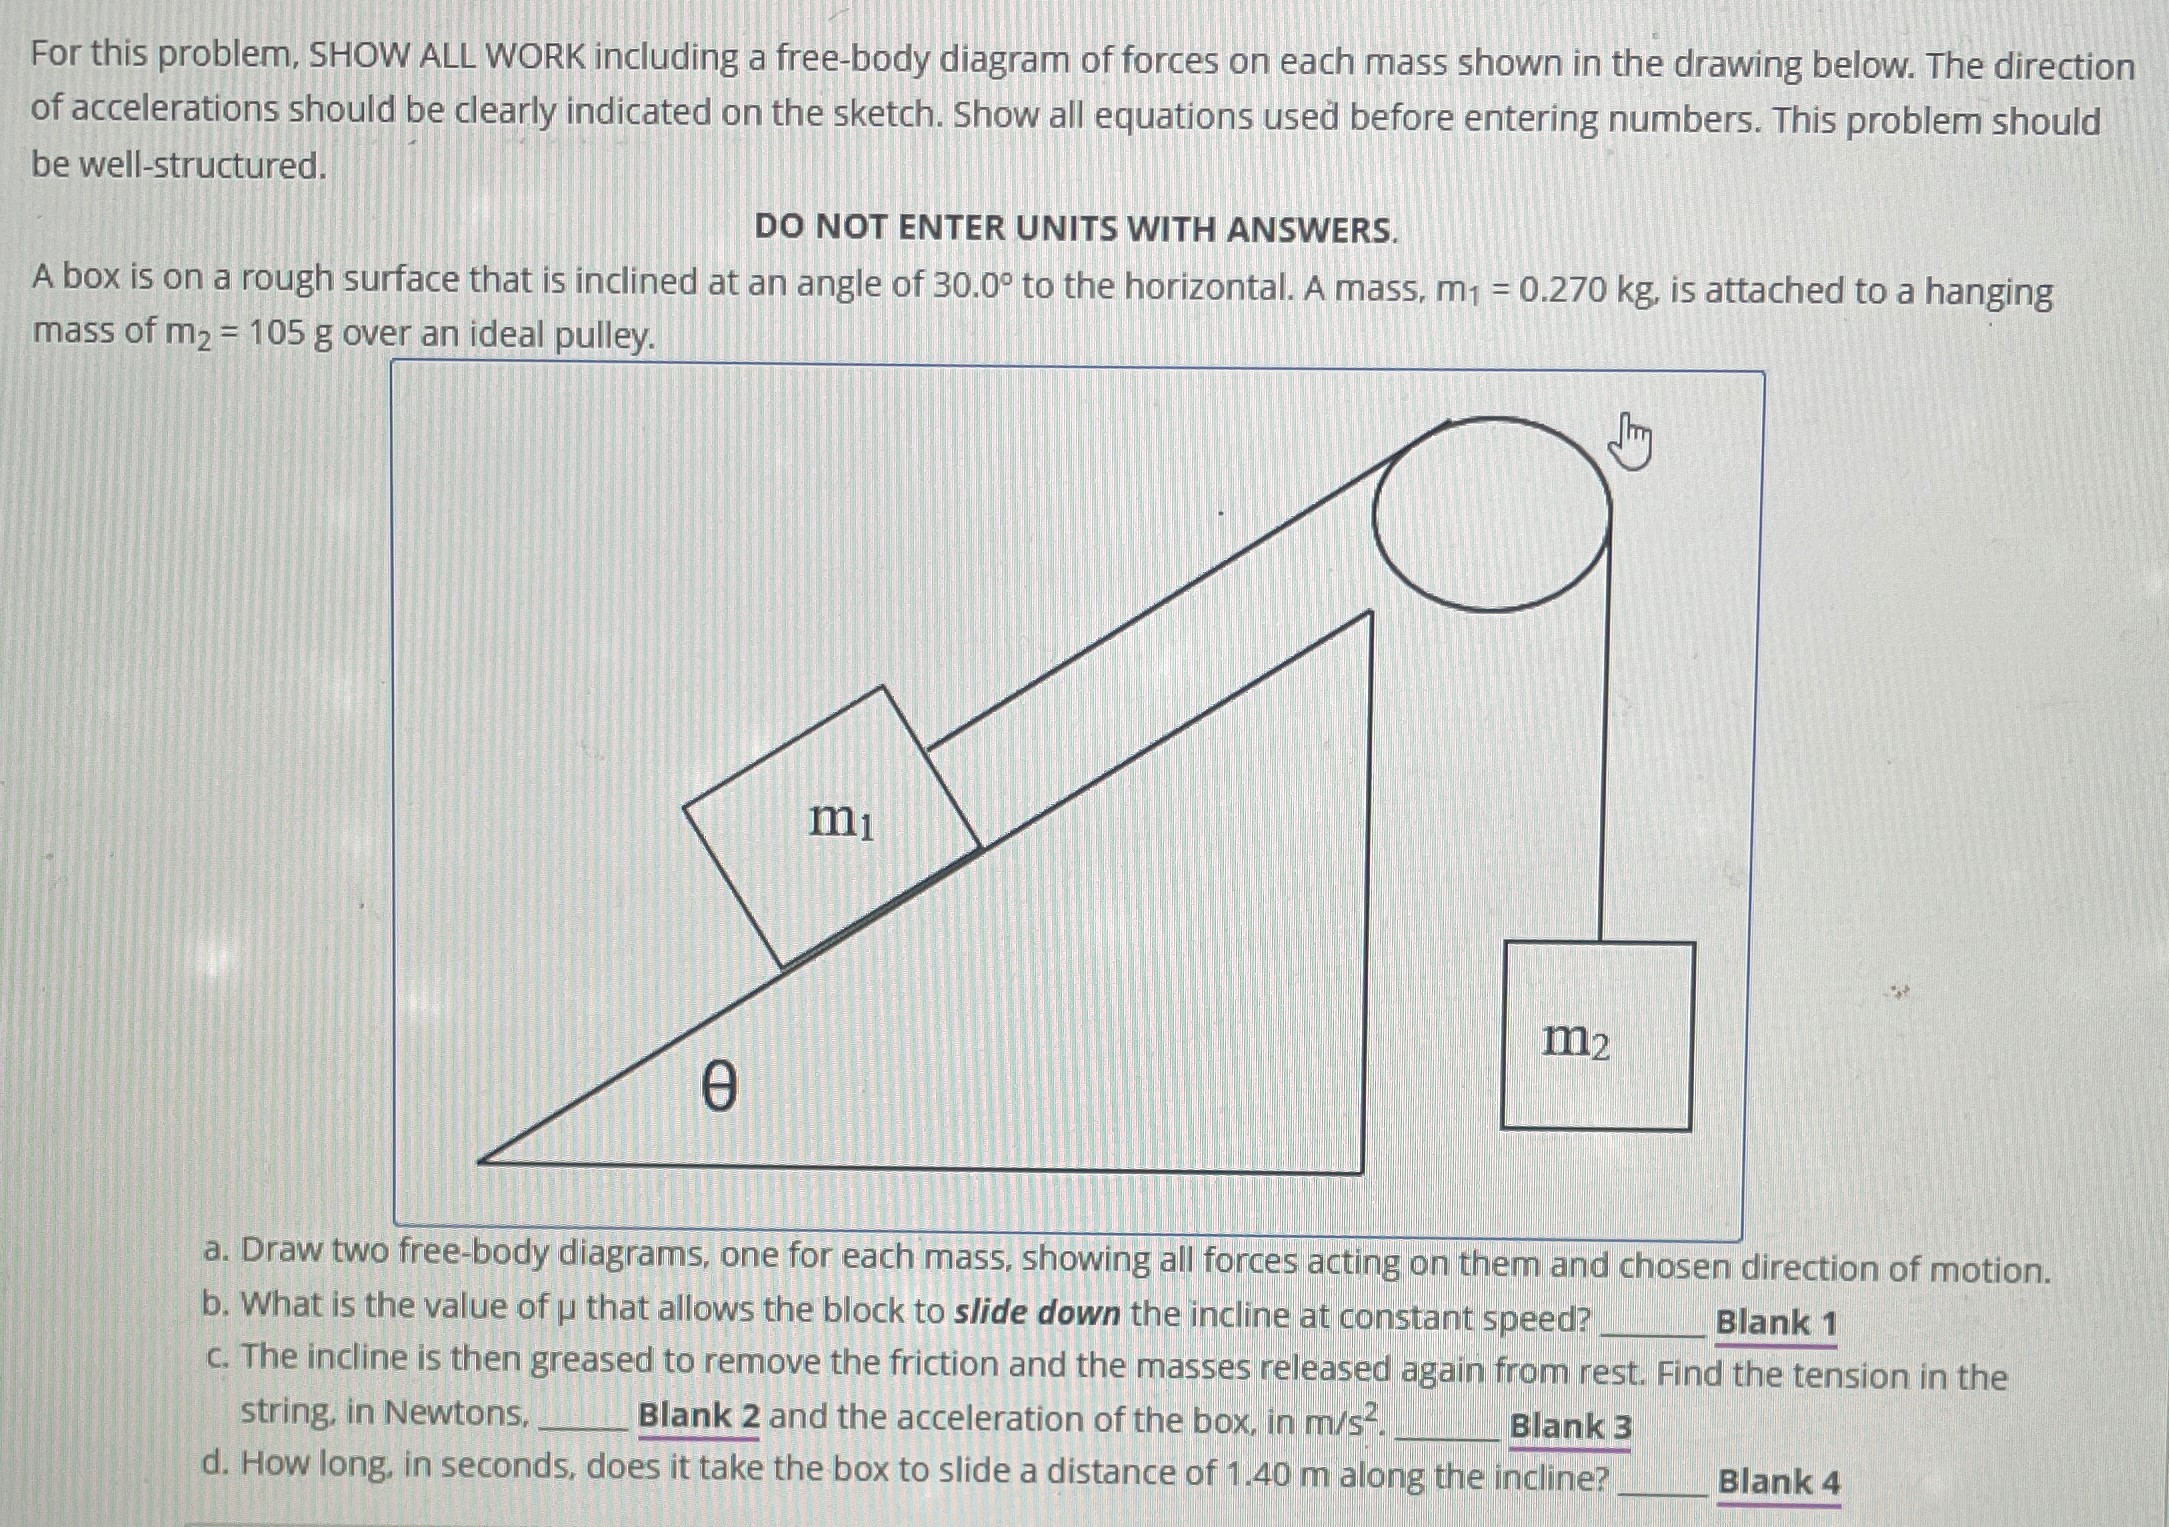 A box is on a rough surface that is inclined at an angle of 30.0∘ to the horizontal. A mass, m1 = 0.270 kg, is attached to a hanging mass of m2 = 105 g over an ideal pulley. a. Draw two free-body diagrams, one for each mass, showing all forces acting on them and chosen direction of motion. b. What is the value of μ that allows the block to slide down the incline at constant speed? Blank 1 c. The incline is then greased to remove the friction and the masses released again from rest. Find the tension in the string, in Newtons, Blank 2 and the acceleration of the box, in m/s2. Blank 3 d. How long, in seconds, does it take the box to slide a distance of 1.40 m along the incline? Blank 4 For this problem, SHOW ALL WORK including a free-body diagram of forces on each mass shown in the drawing below. The direction of accelerations should be clearly indicated on the sketch. Show all equations used before entering numbers. This problem should be well-structured. DO NOT ENTER UNITS WITH ANSWERS.